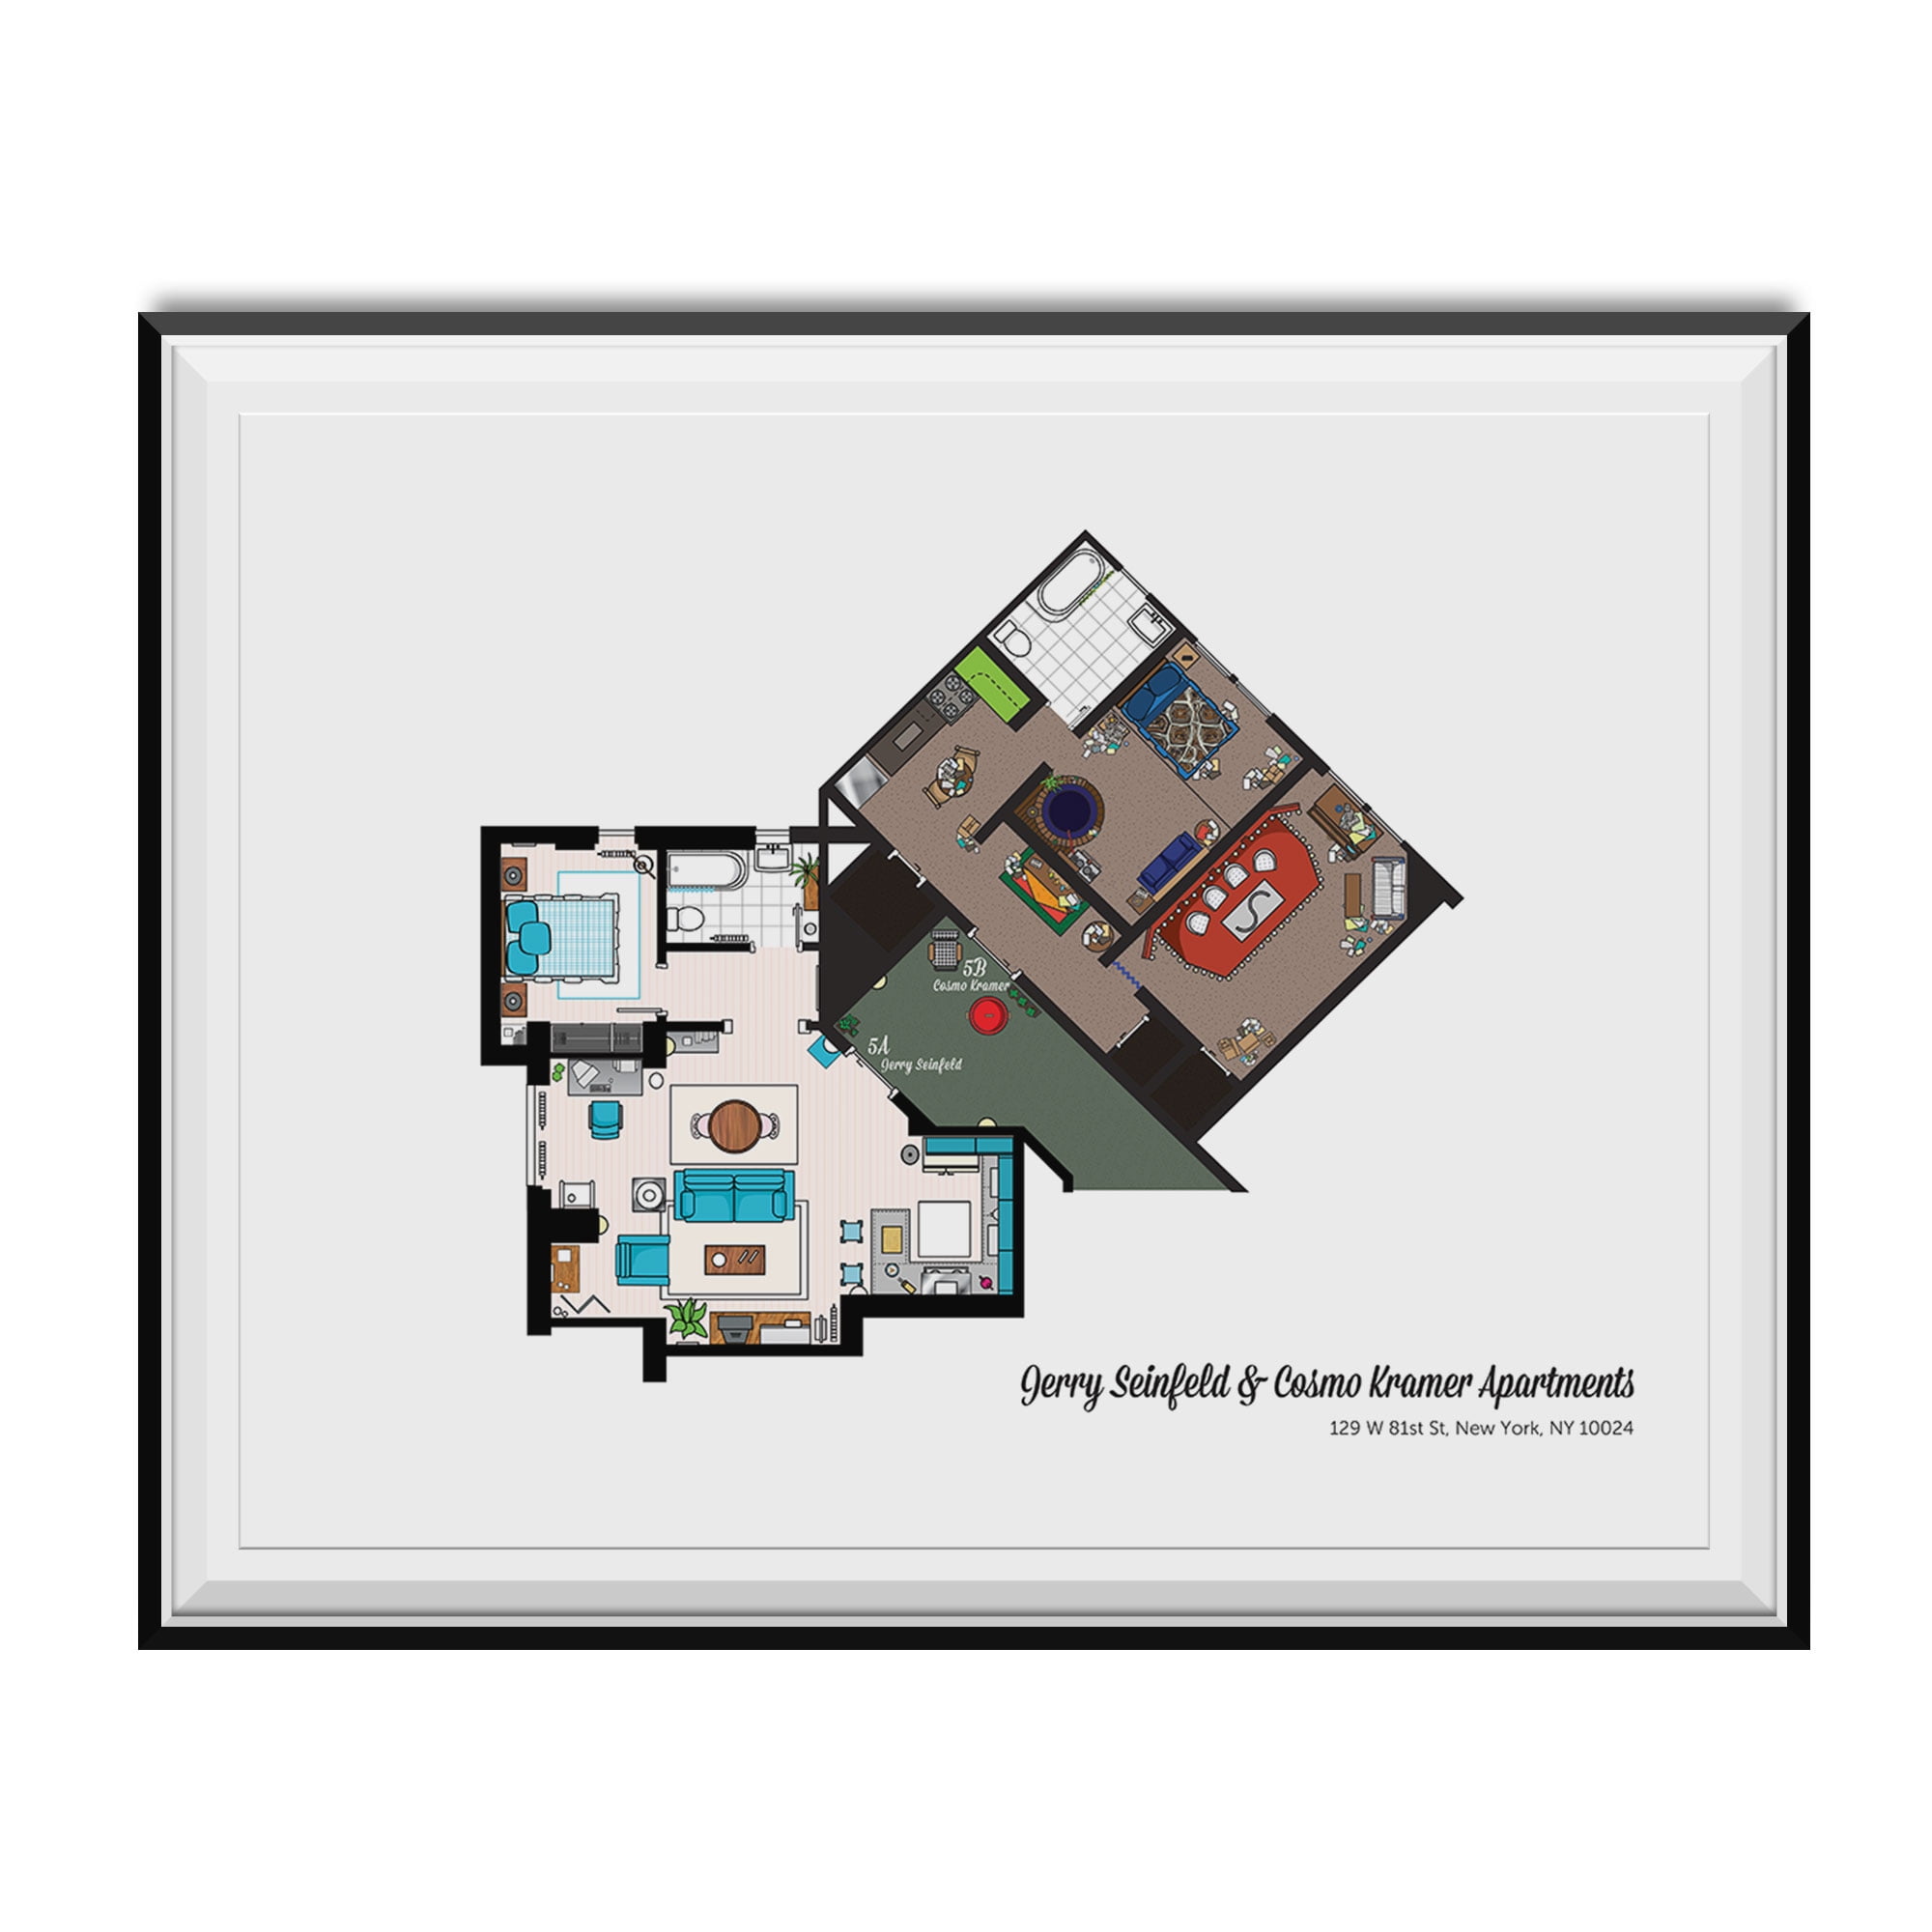 Jerry Seinfeld And Cosmo Kramer Apartments Floor Plan